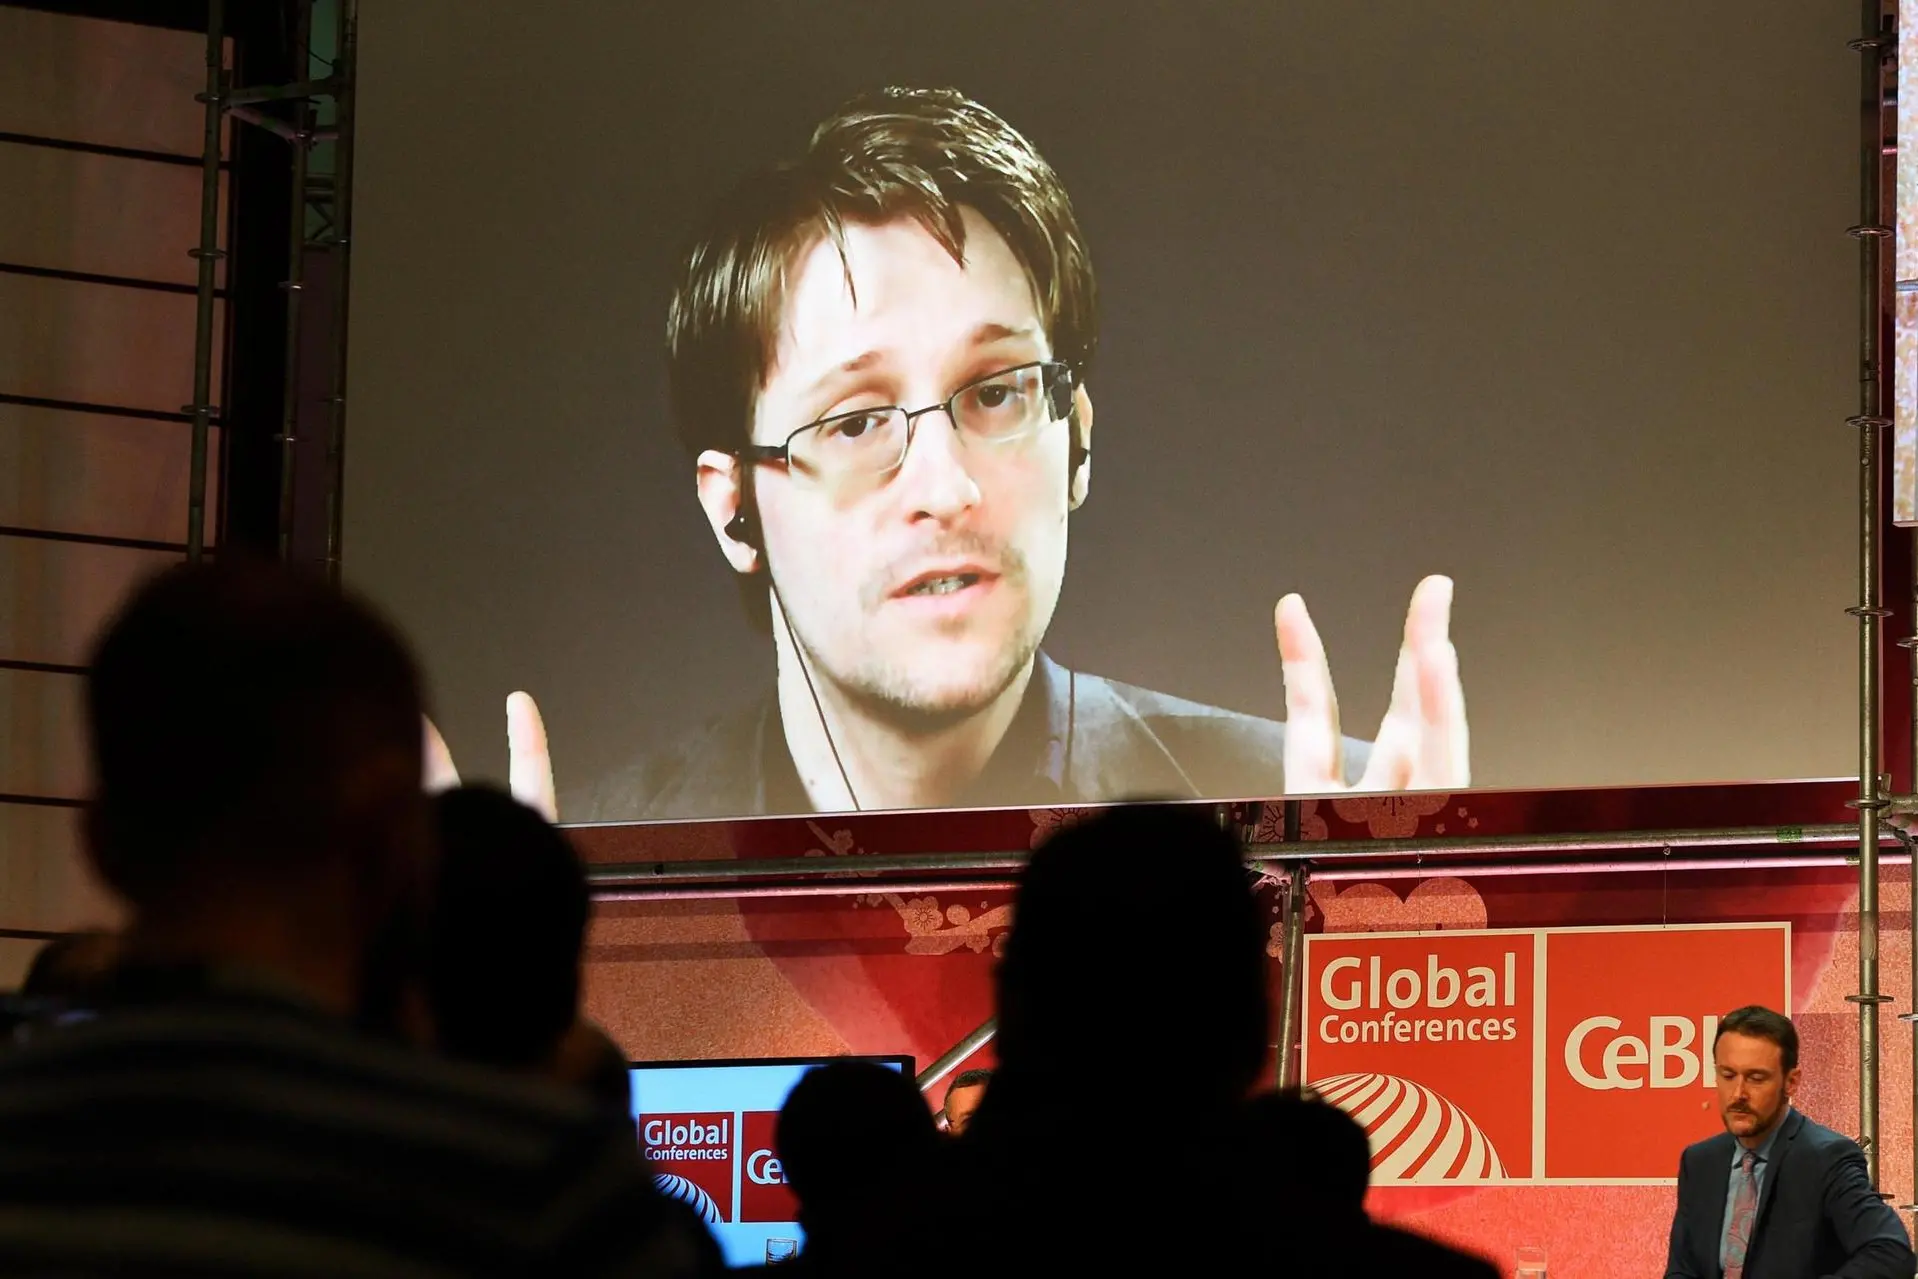 epa05862783 A handout photo made available by CeBIT showing US whistle-blower Edward Snowden on a large screen during the videoconference, 'Datasecurity and Privacy in the Age of Surveillance' at the CeBIT computing trade fair in Hanover, northern Germany, 21 March 2017. Snowden was connected from an unknown location from his exile in Russia. Reports state that more than 3.000 exhibitors from 70 countries are showing their products and solutions at the fair which expects to see about 200.000 visitors from 20 to 24 March 2017. EPA/RAINER JENSEN / CeBIT /HANDOUT HANDOUT EDITORIAL USE ONLY/NO SALES